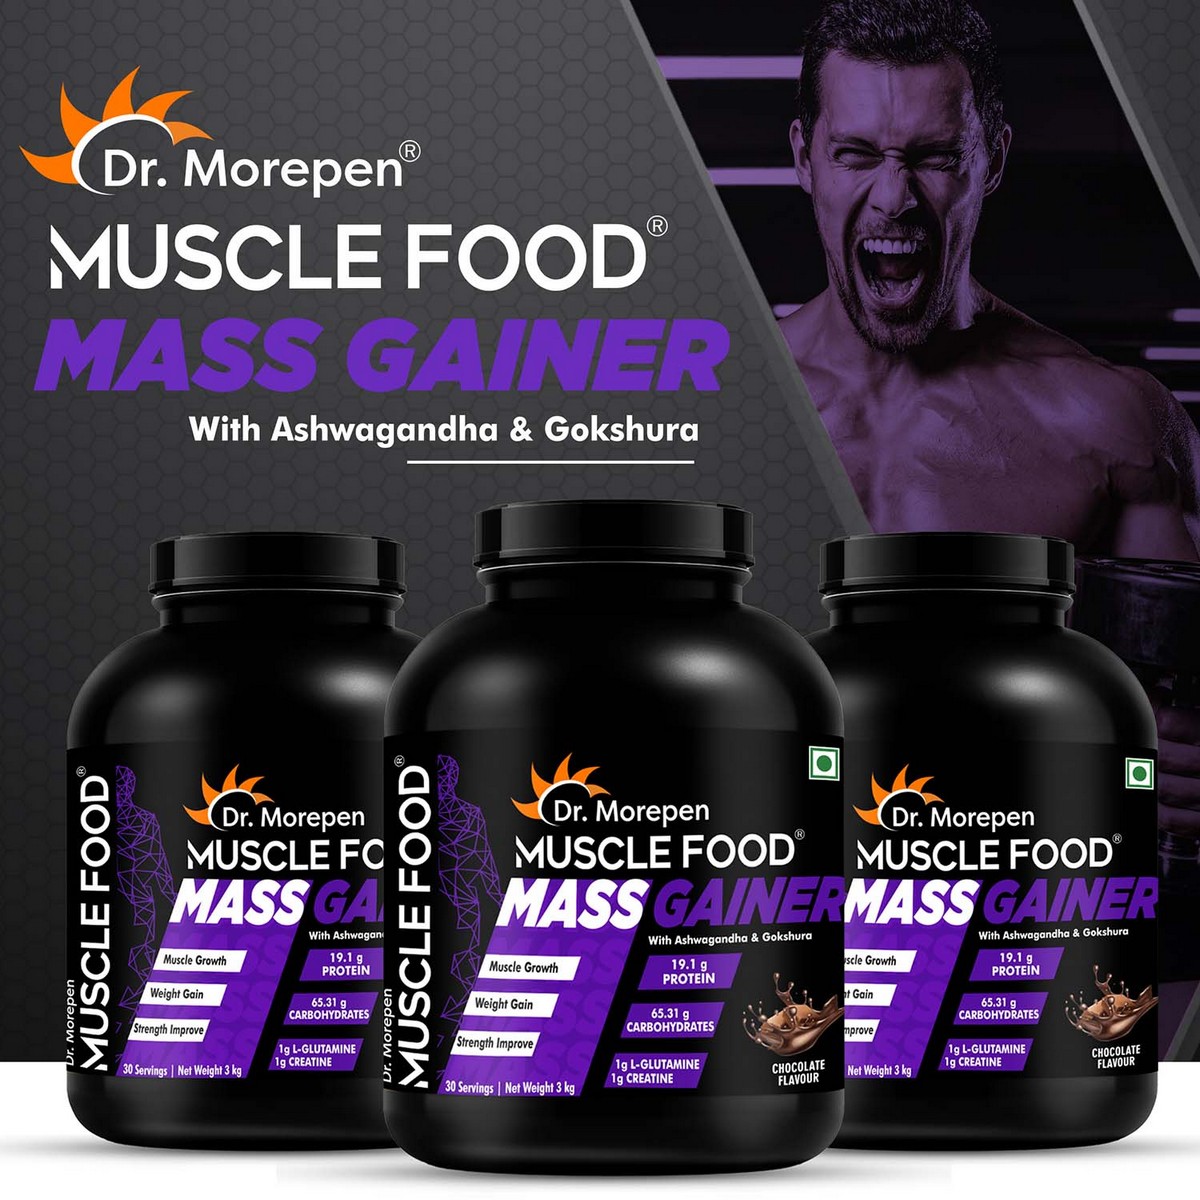 Dr. Morepen Muscle Food Mass Gainer Chocolate Flavour – 3kg 7